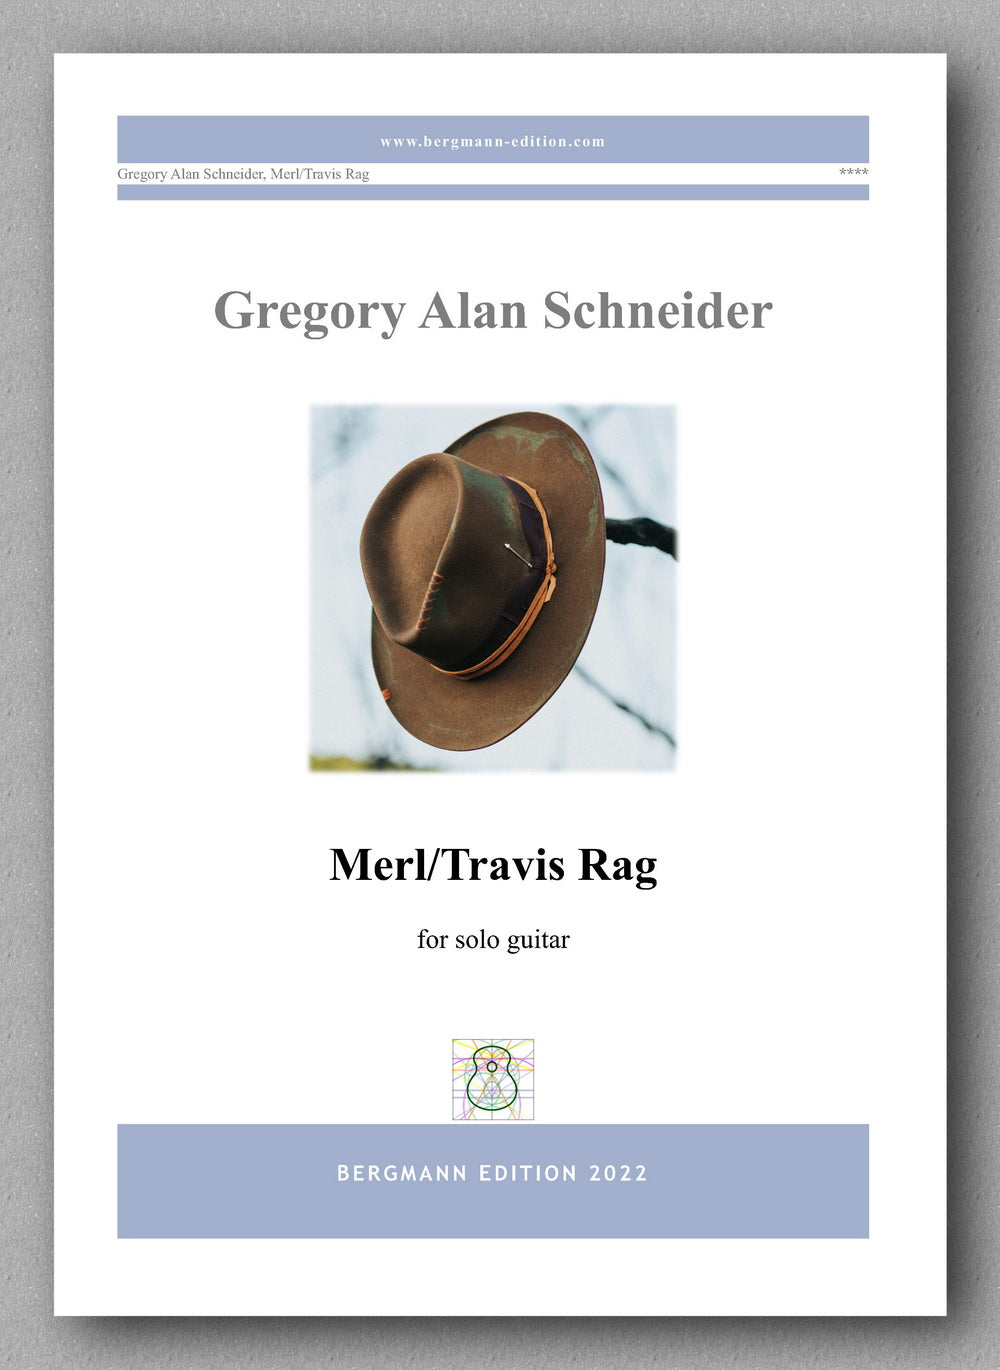 Gregory Alan Schneider, Merl/Travis Rag - preview of the cover